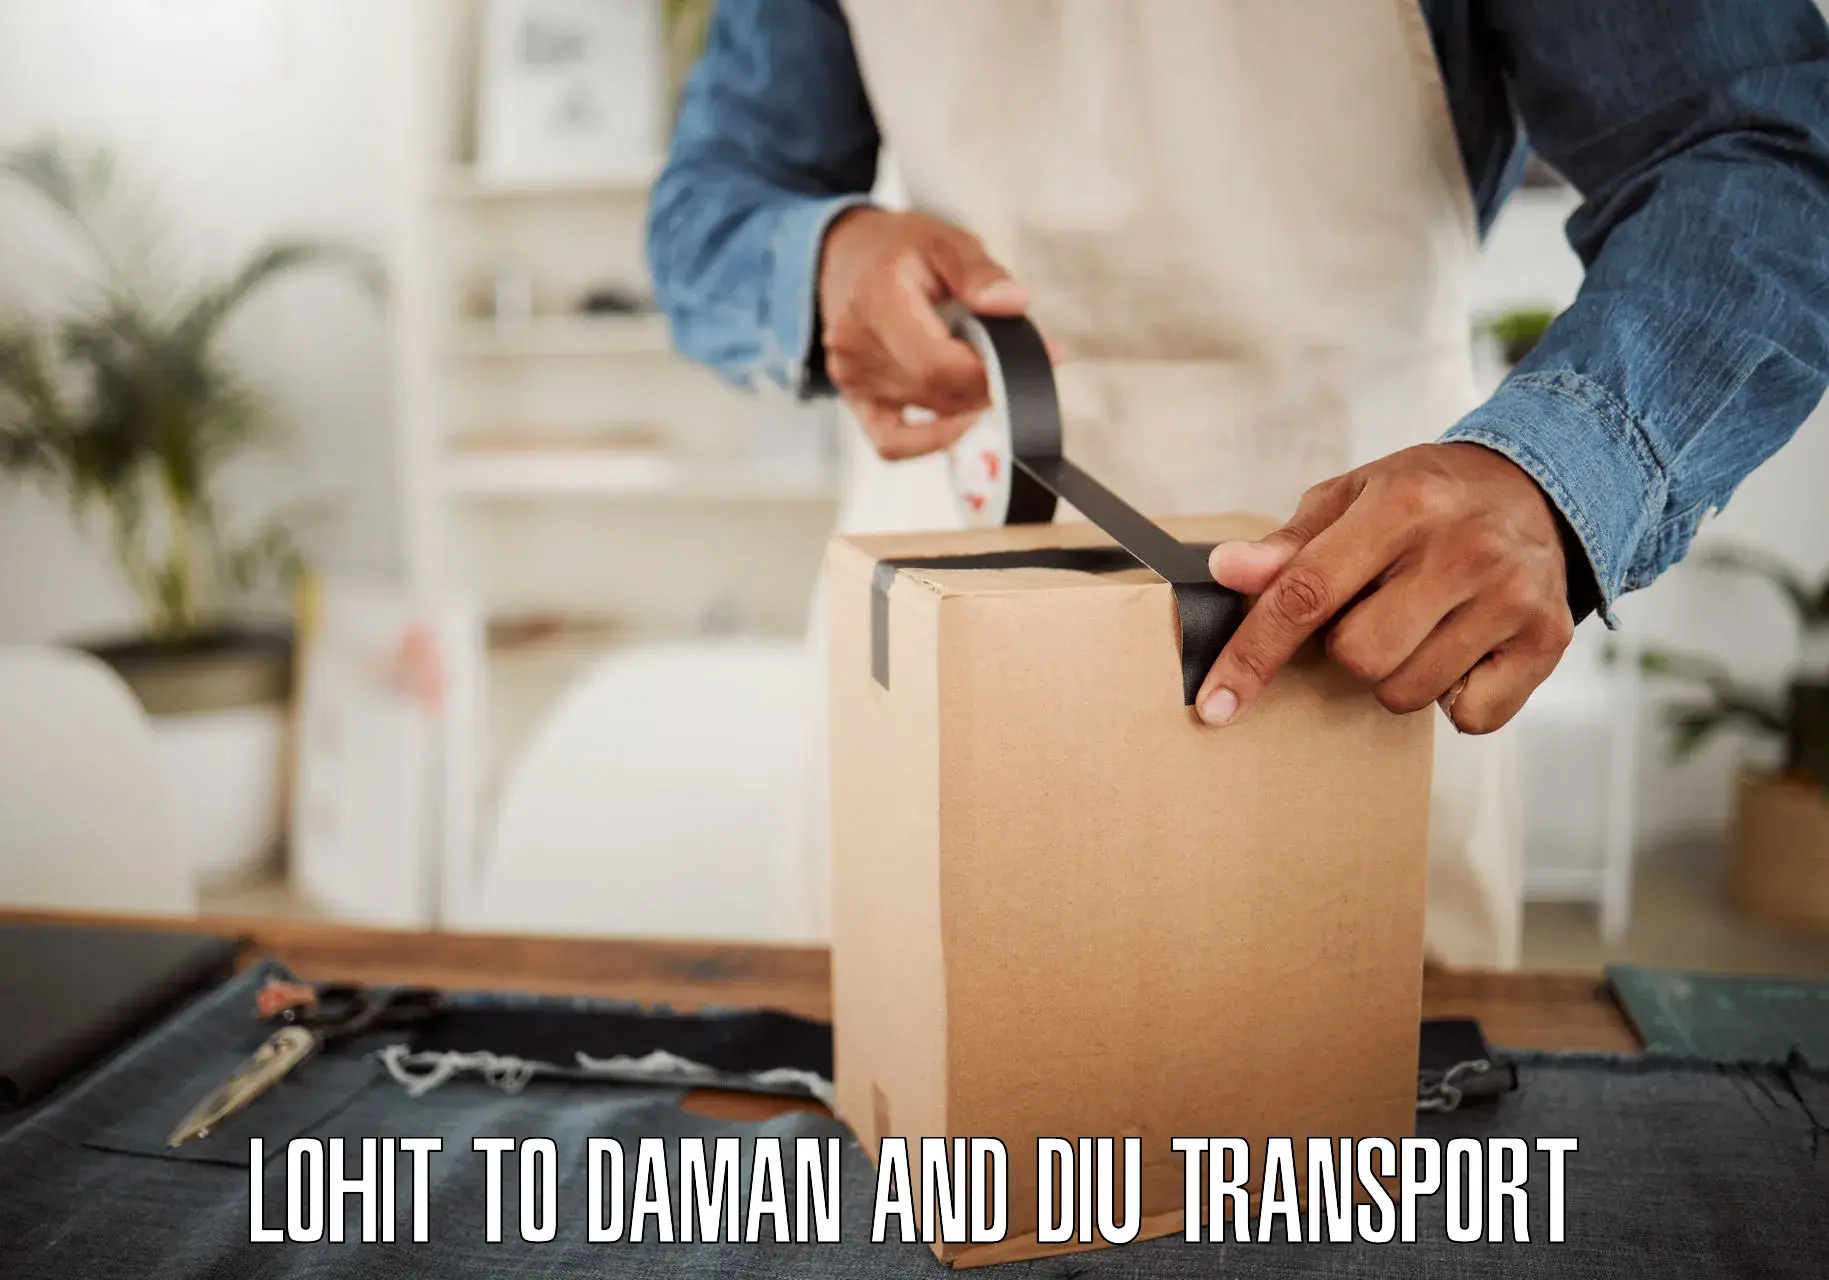 Commercial transport service Lohit to Daman and Diu